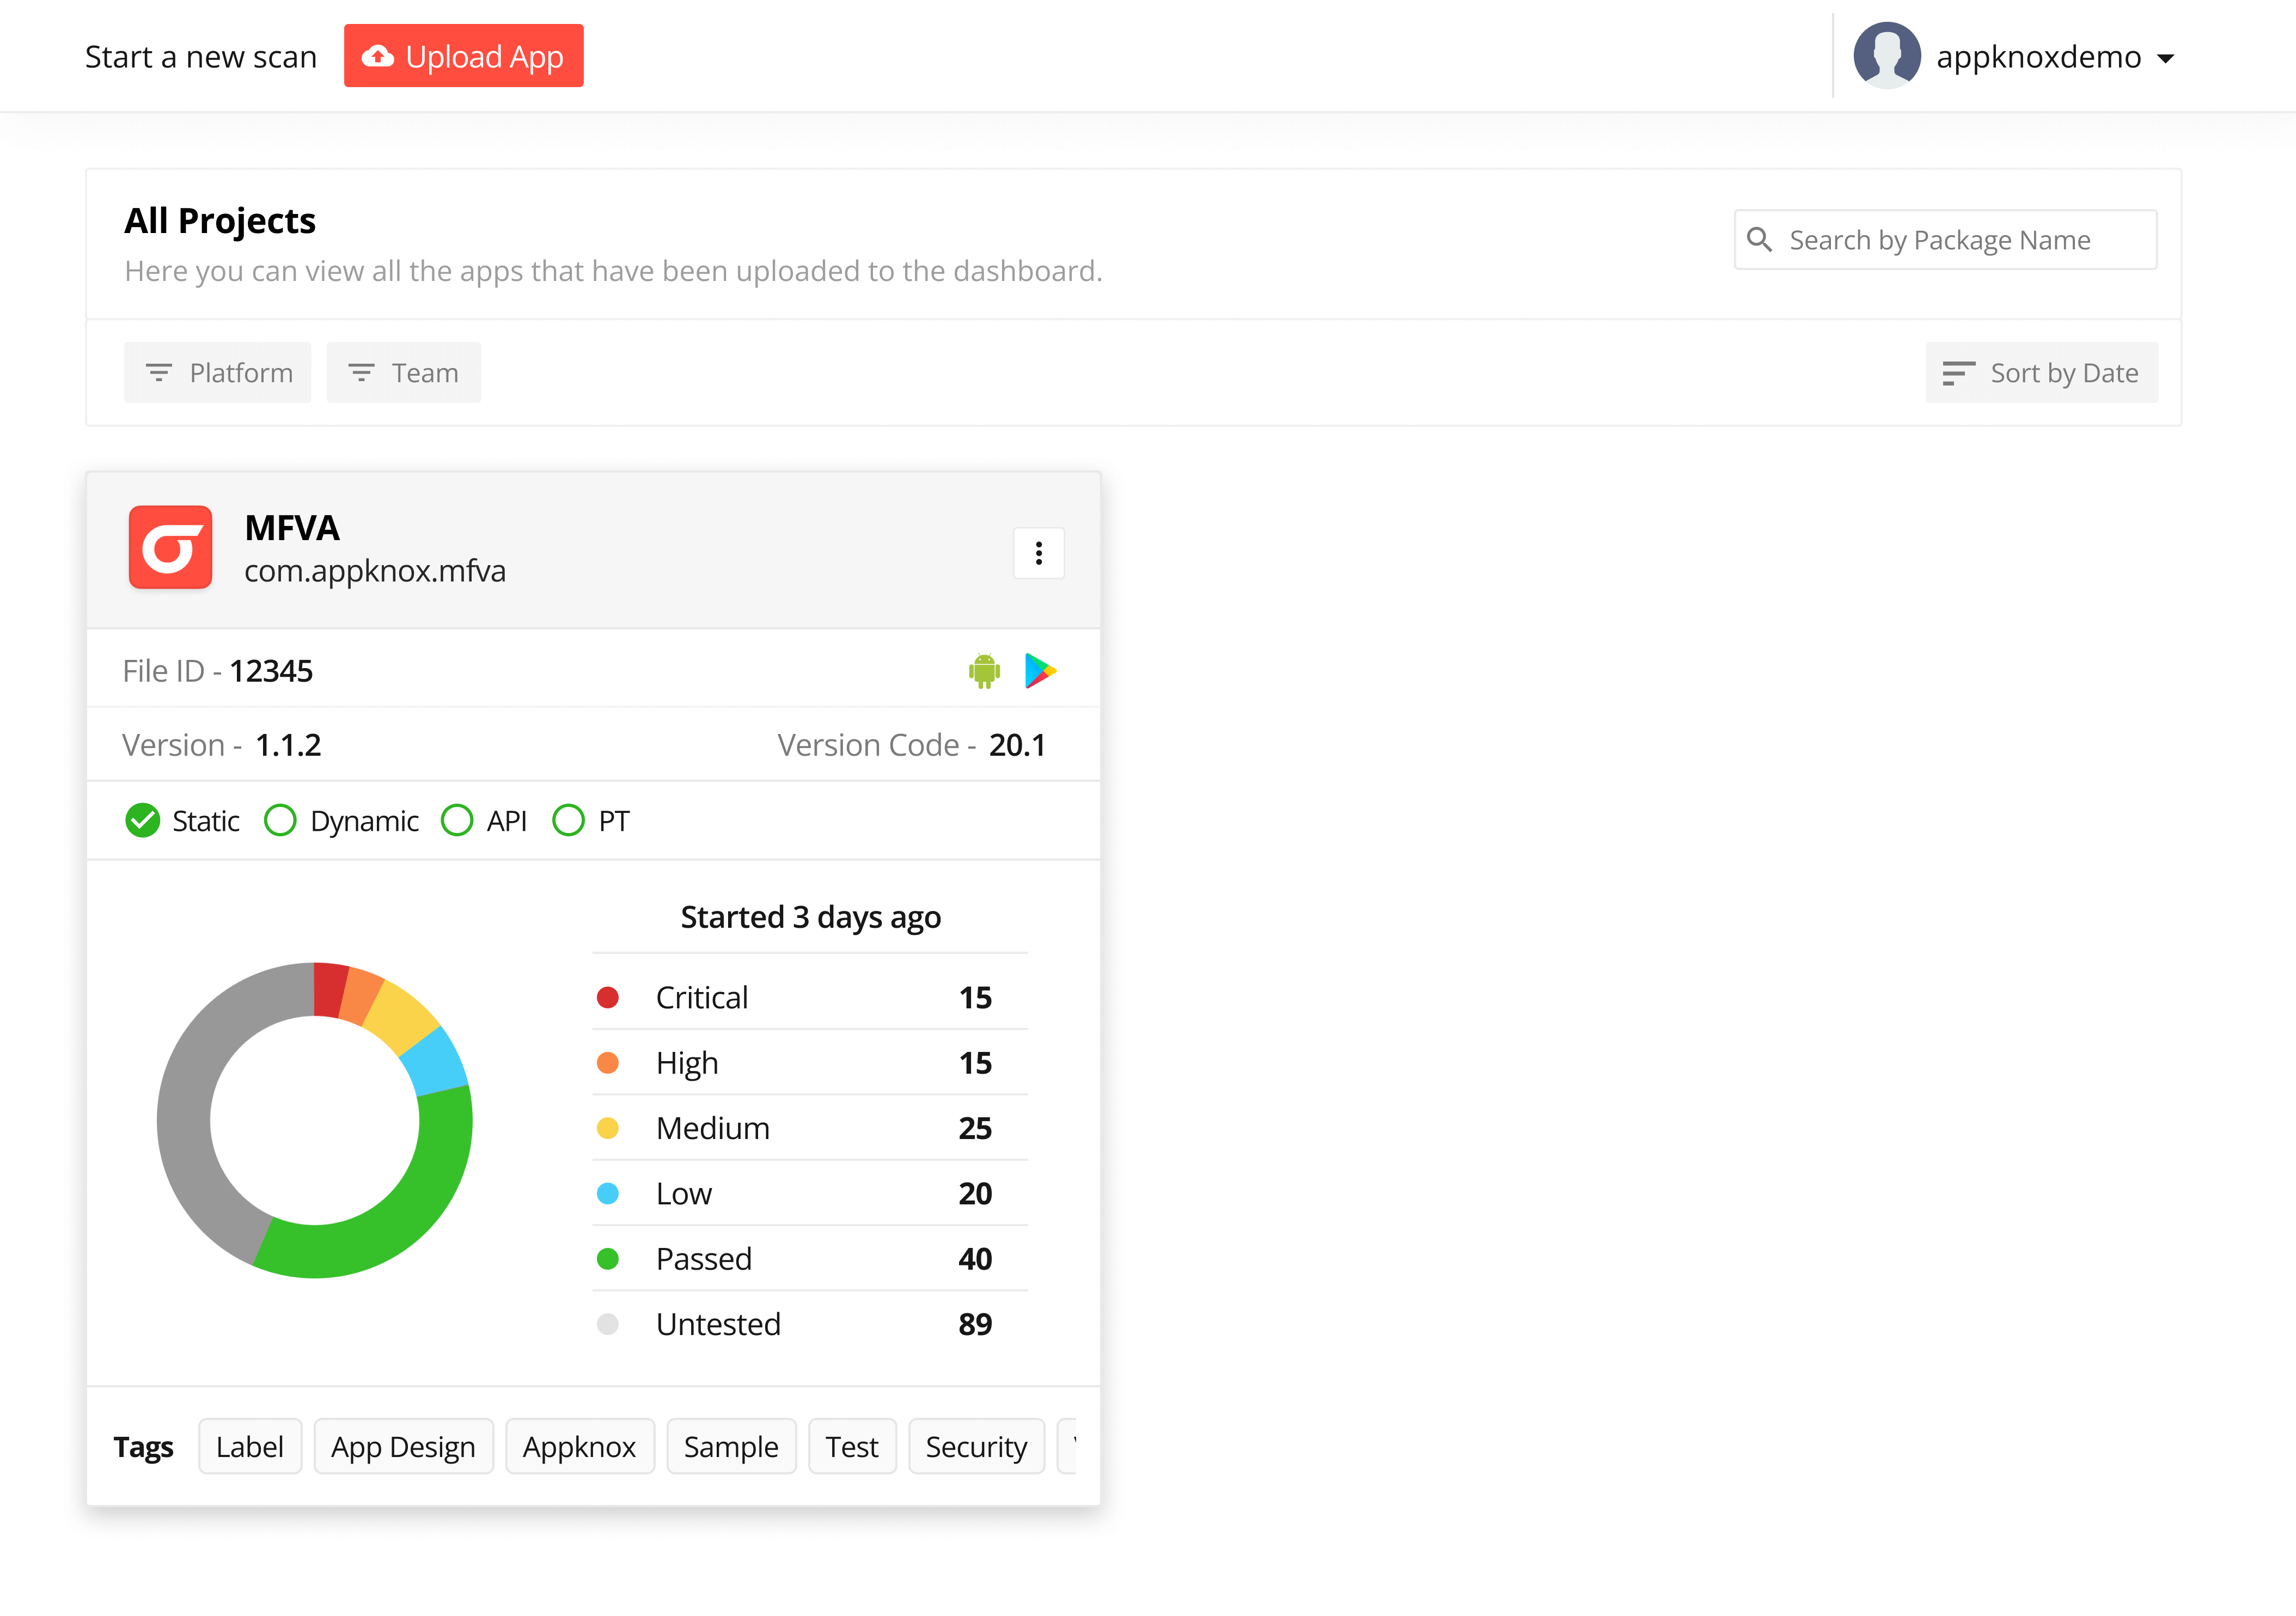 Appknox dashboard showing the app uploads and the scan results according to criticality